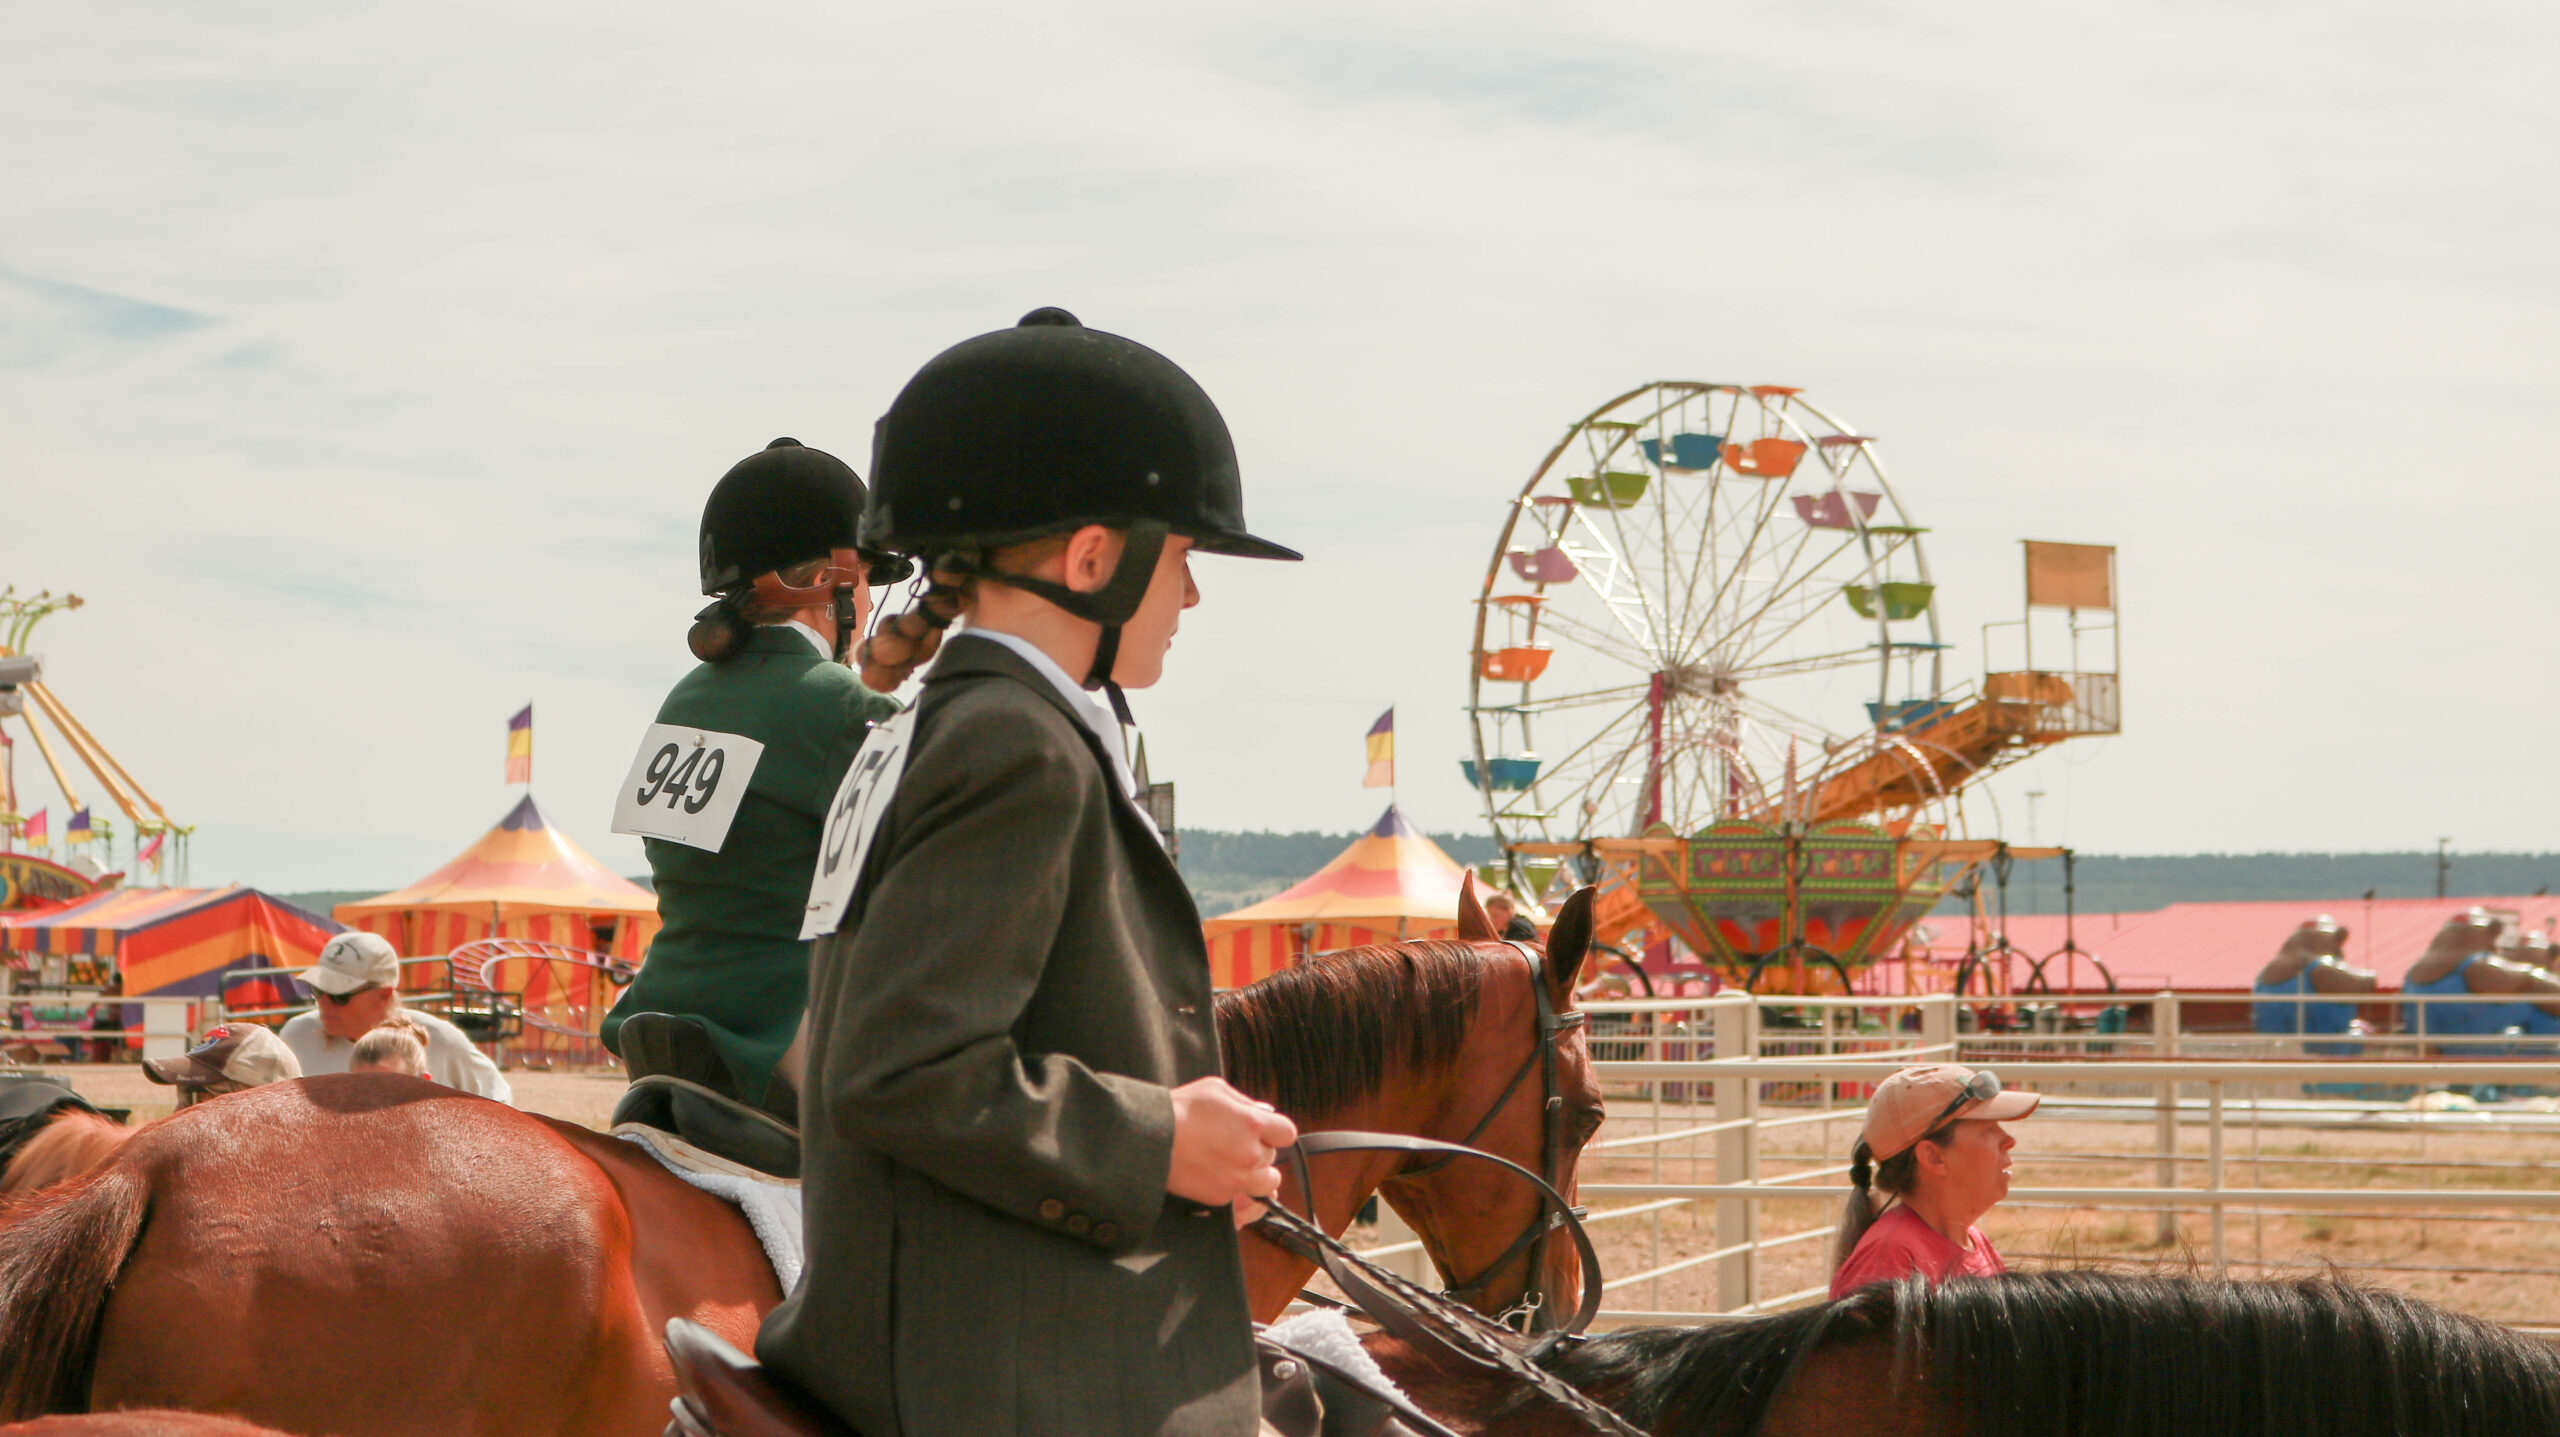 Horse Show Contestants at the Park County Fair with the Carnival in the background